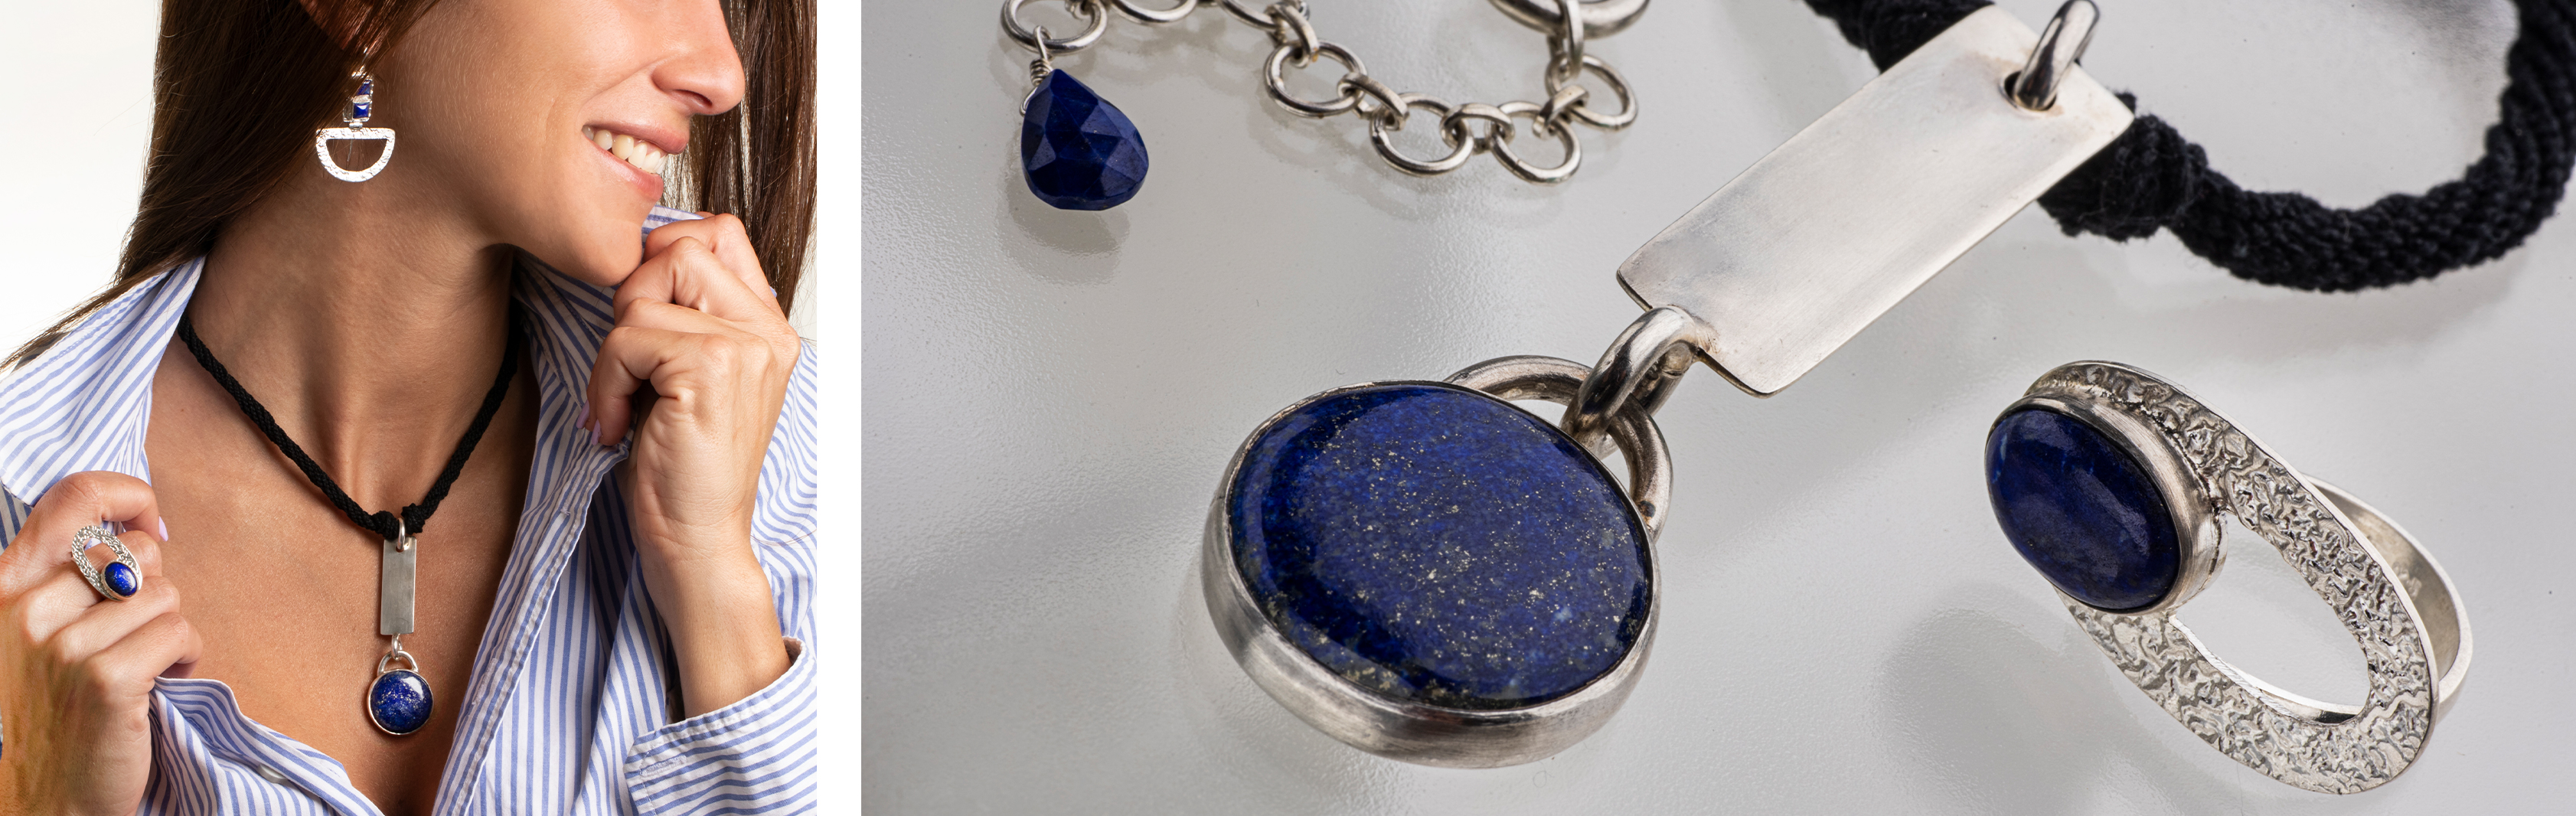 Lapis stone, Lapis lazuli, Lapis lazuli stone, Hammered silver, oval jewelry, oval earring, oval ring, square earring, silver and natural stone necklace, special earrings, GRAS silver jewelry, GRAS silver design, GRAS designs in silver and gems